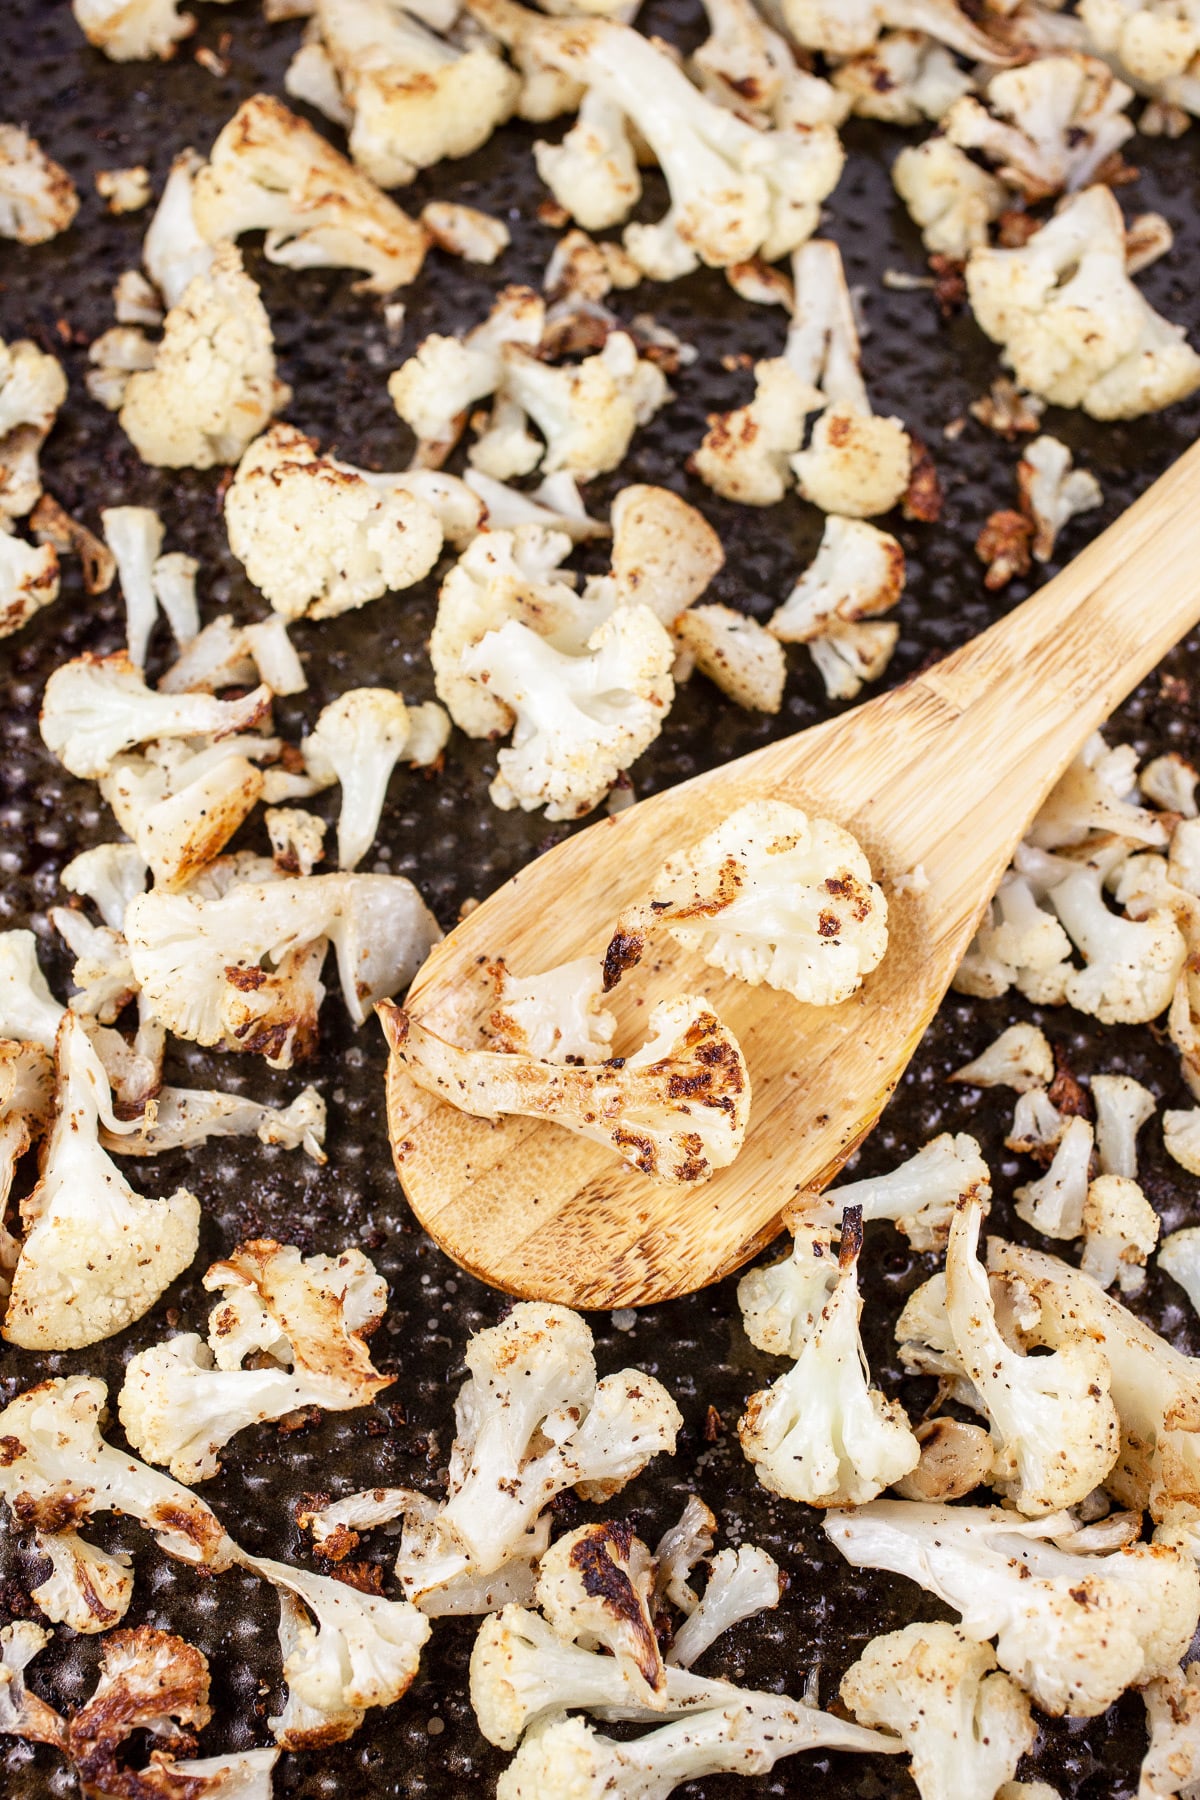 Roasted cauliflower florets on baking sheet with wooden spoon.